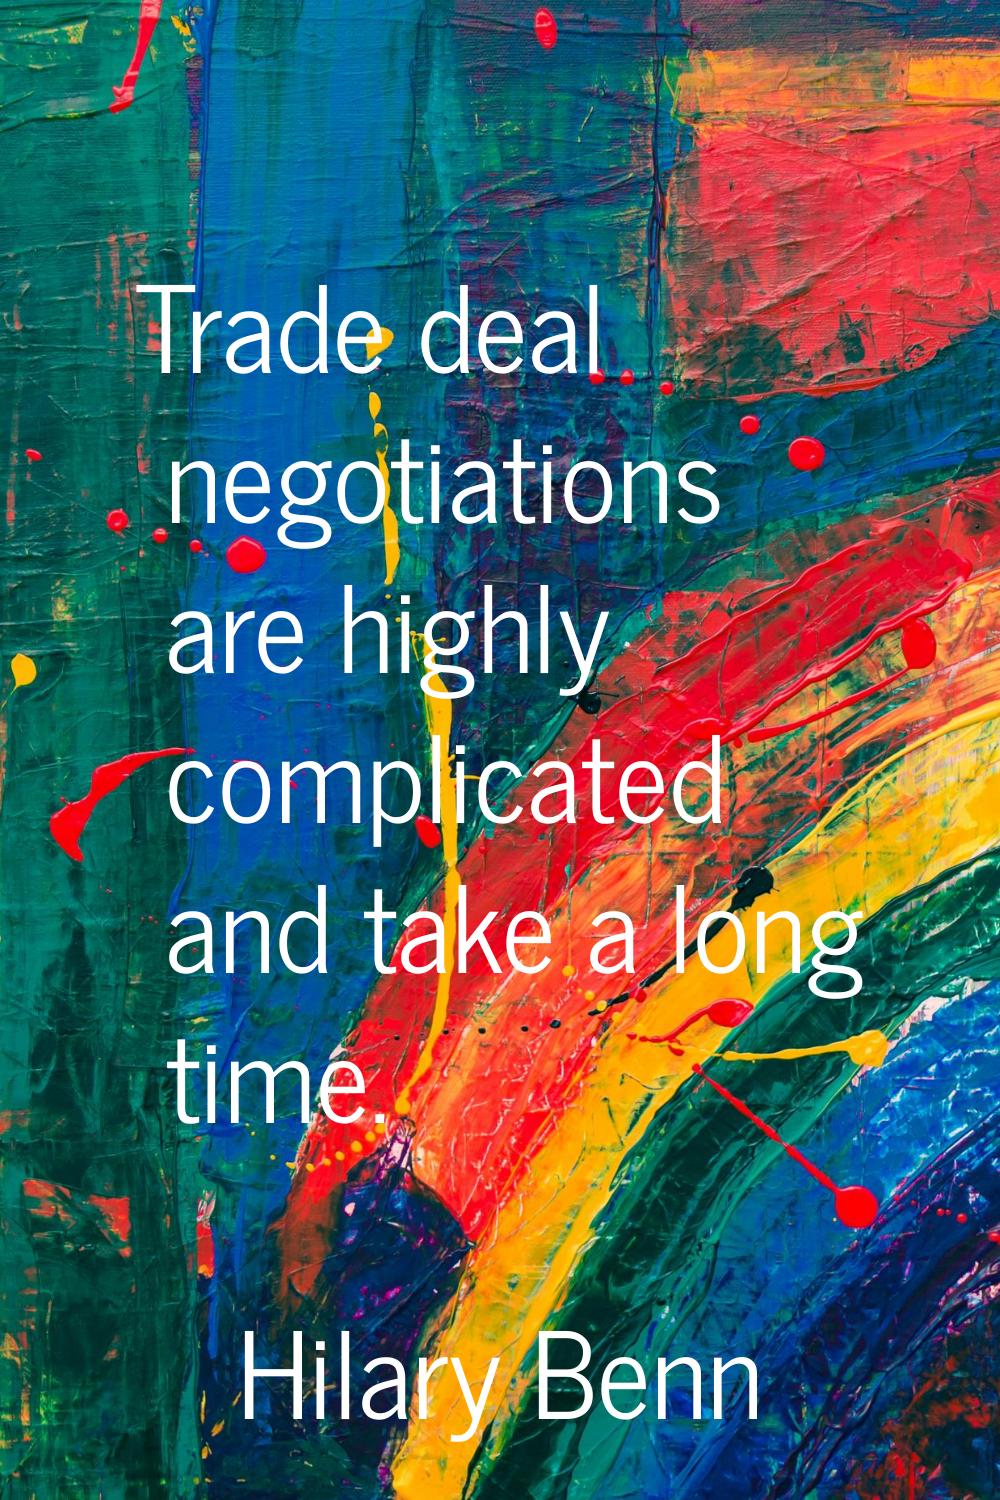 Trade deal negotiations are highly complicated and take a long time.